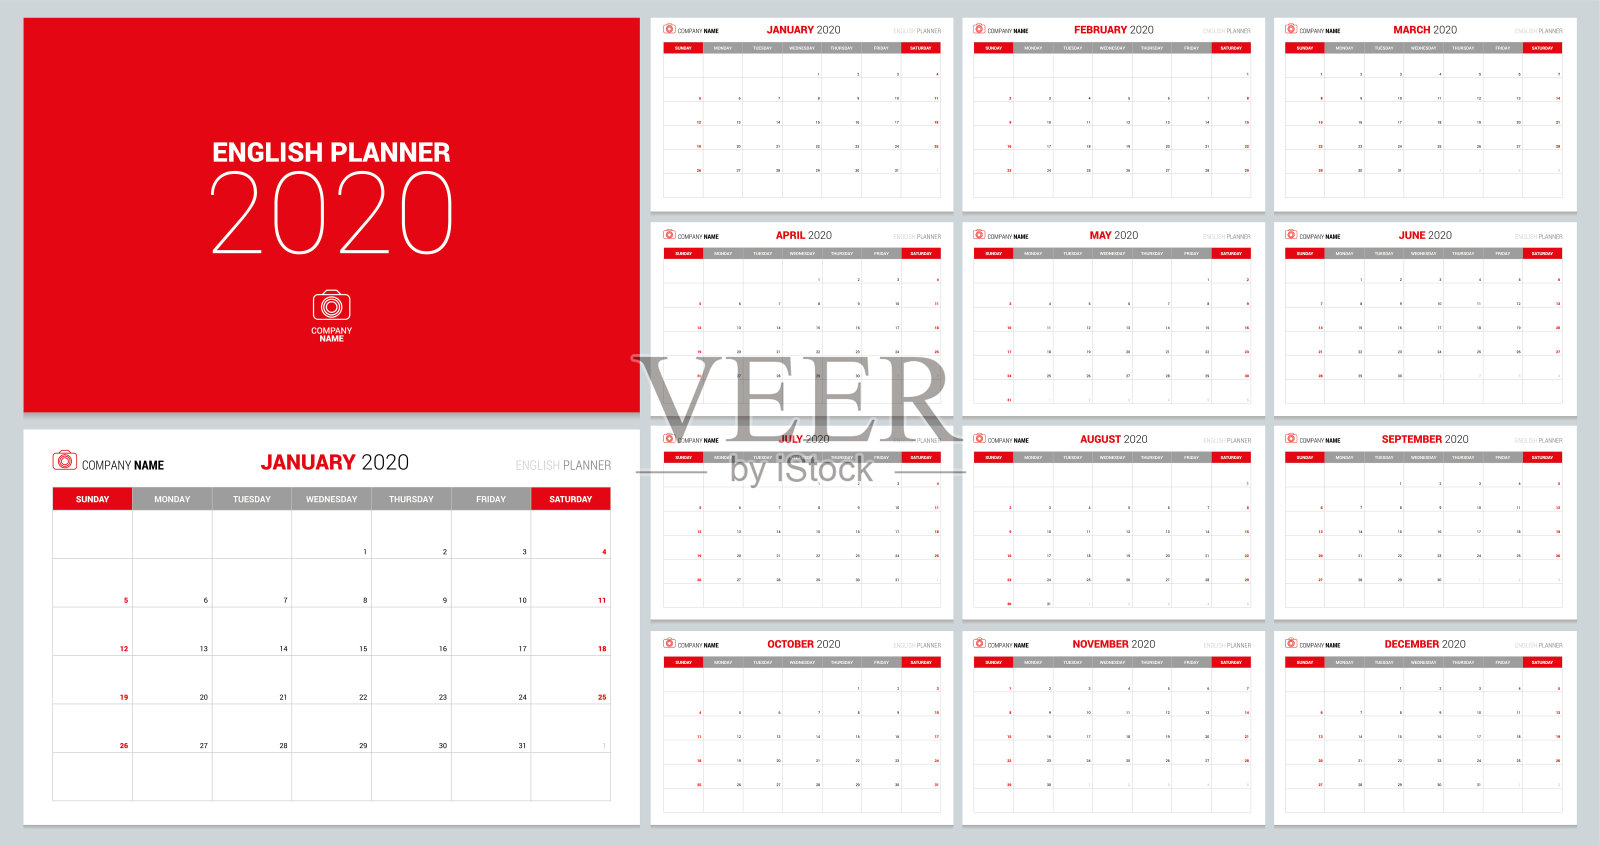 2020 calendar. English planner. Сolor vector template. Week starts on Sunday. Business planning. New year calender. Clean minimal table. Simple design stock illustration设计模板素材